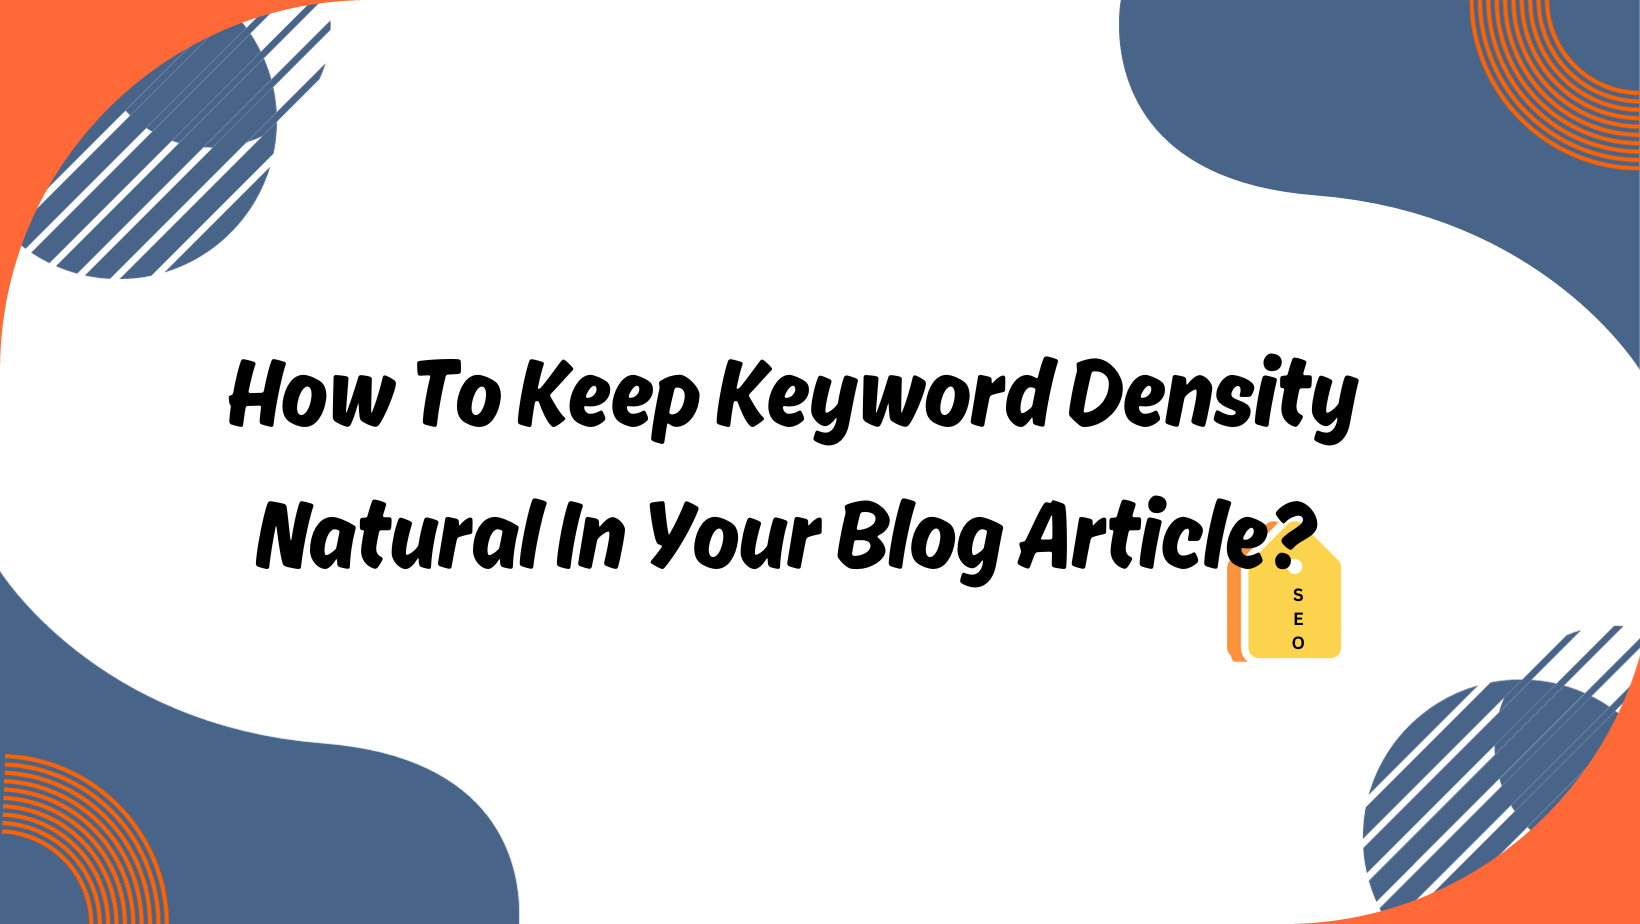 How To Keep Keyword Density Natural In Your Blog Article